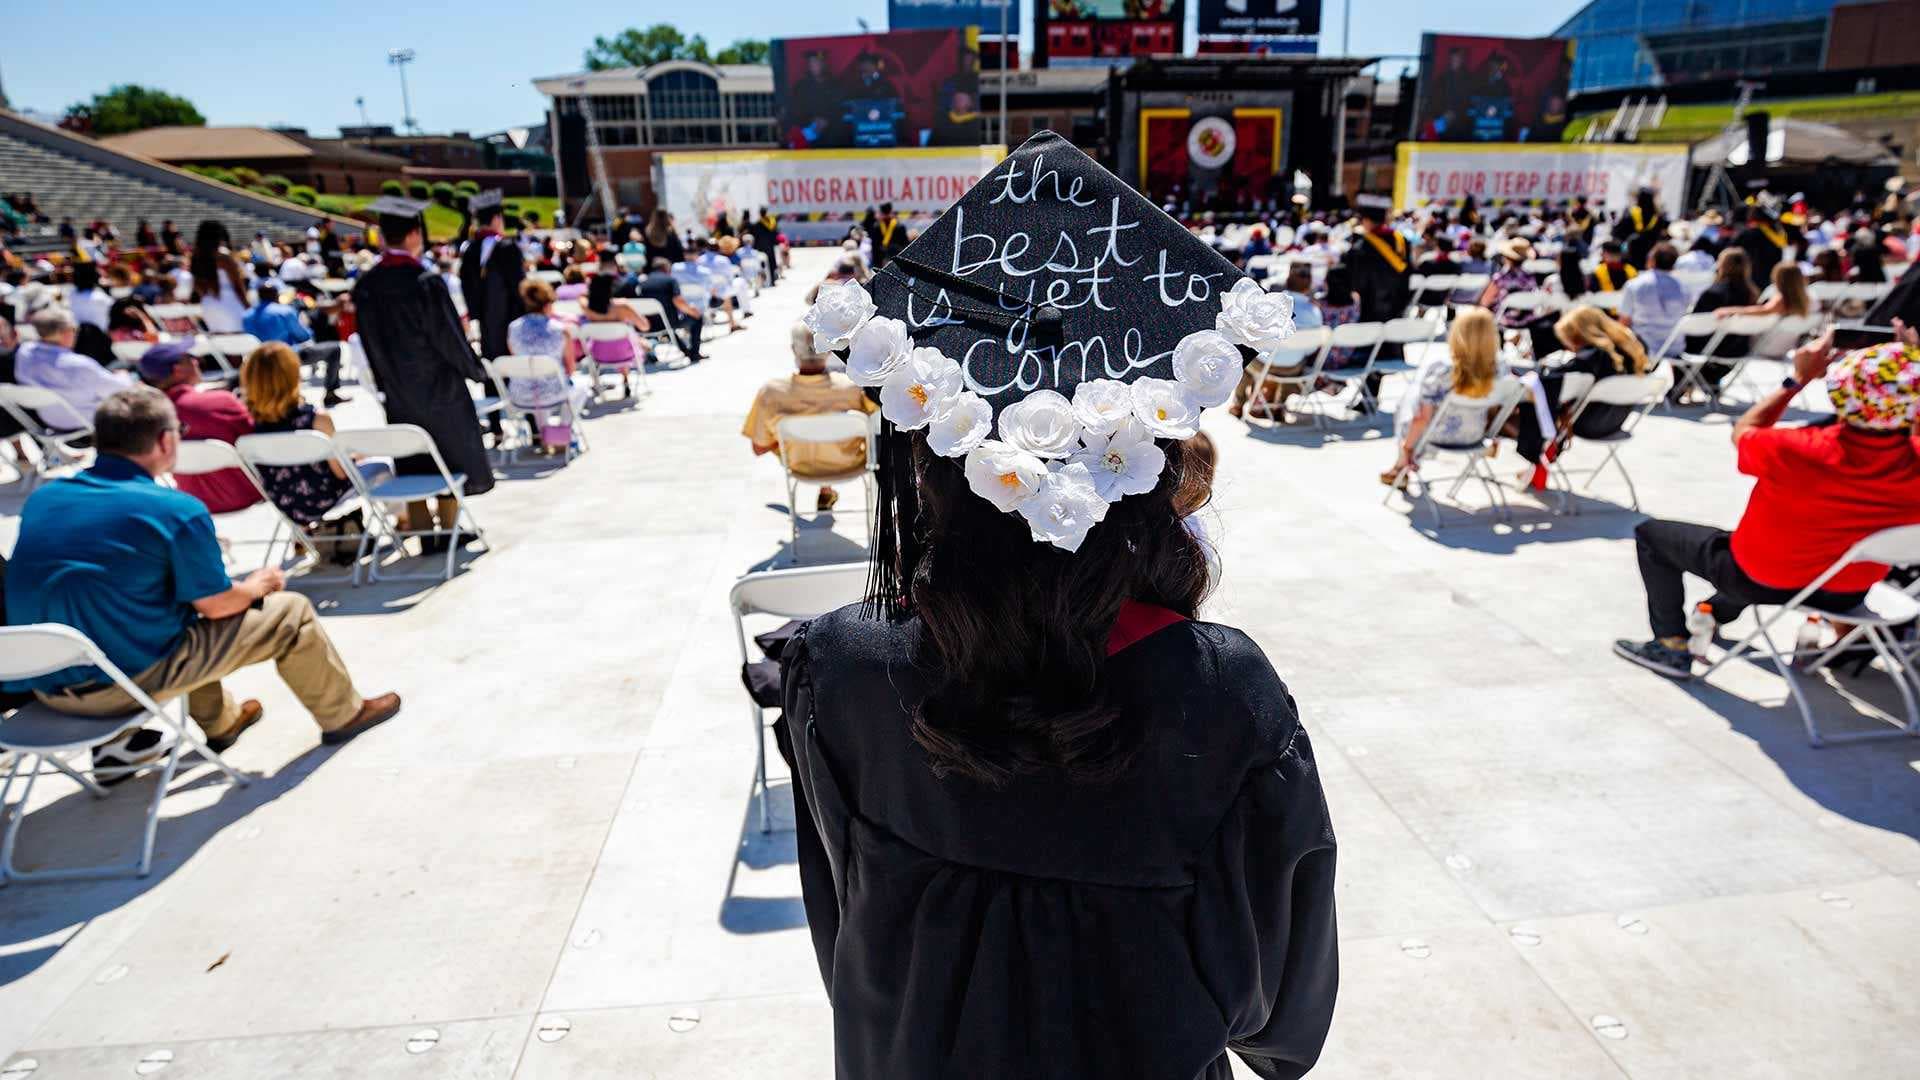 Student at commencement with cap that says, "The best is yet to come"